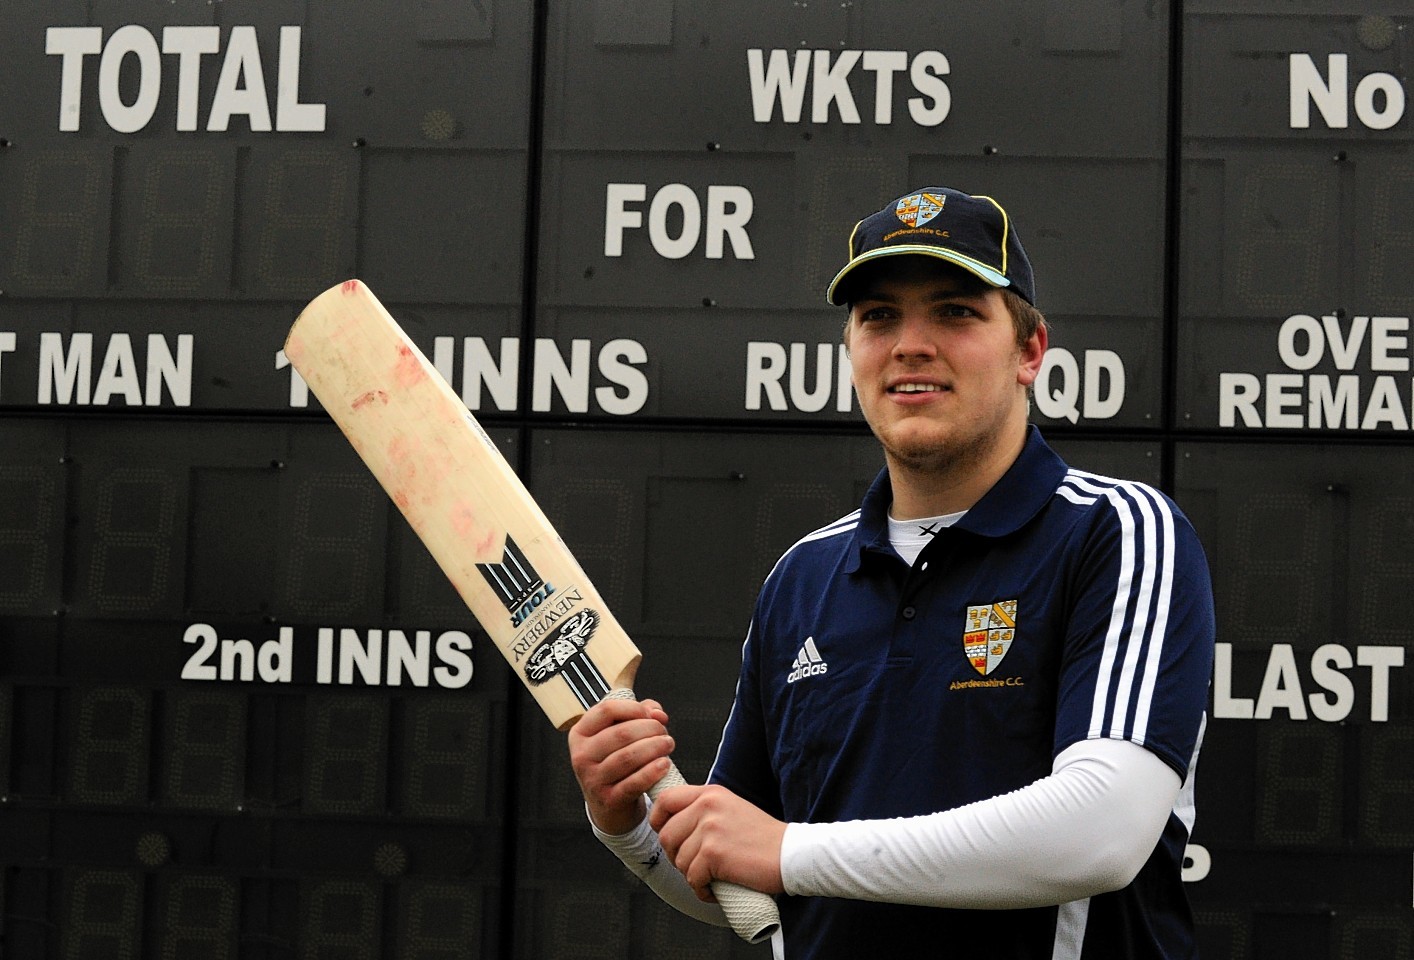 Shire batsman Chris Venske is back in action following a month out with a broken bone in his hand